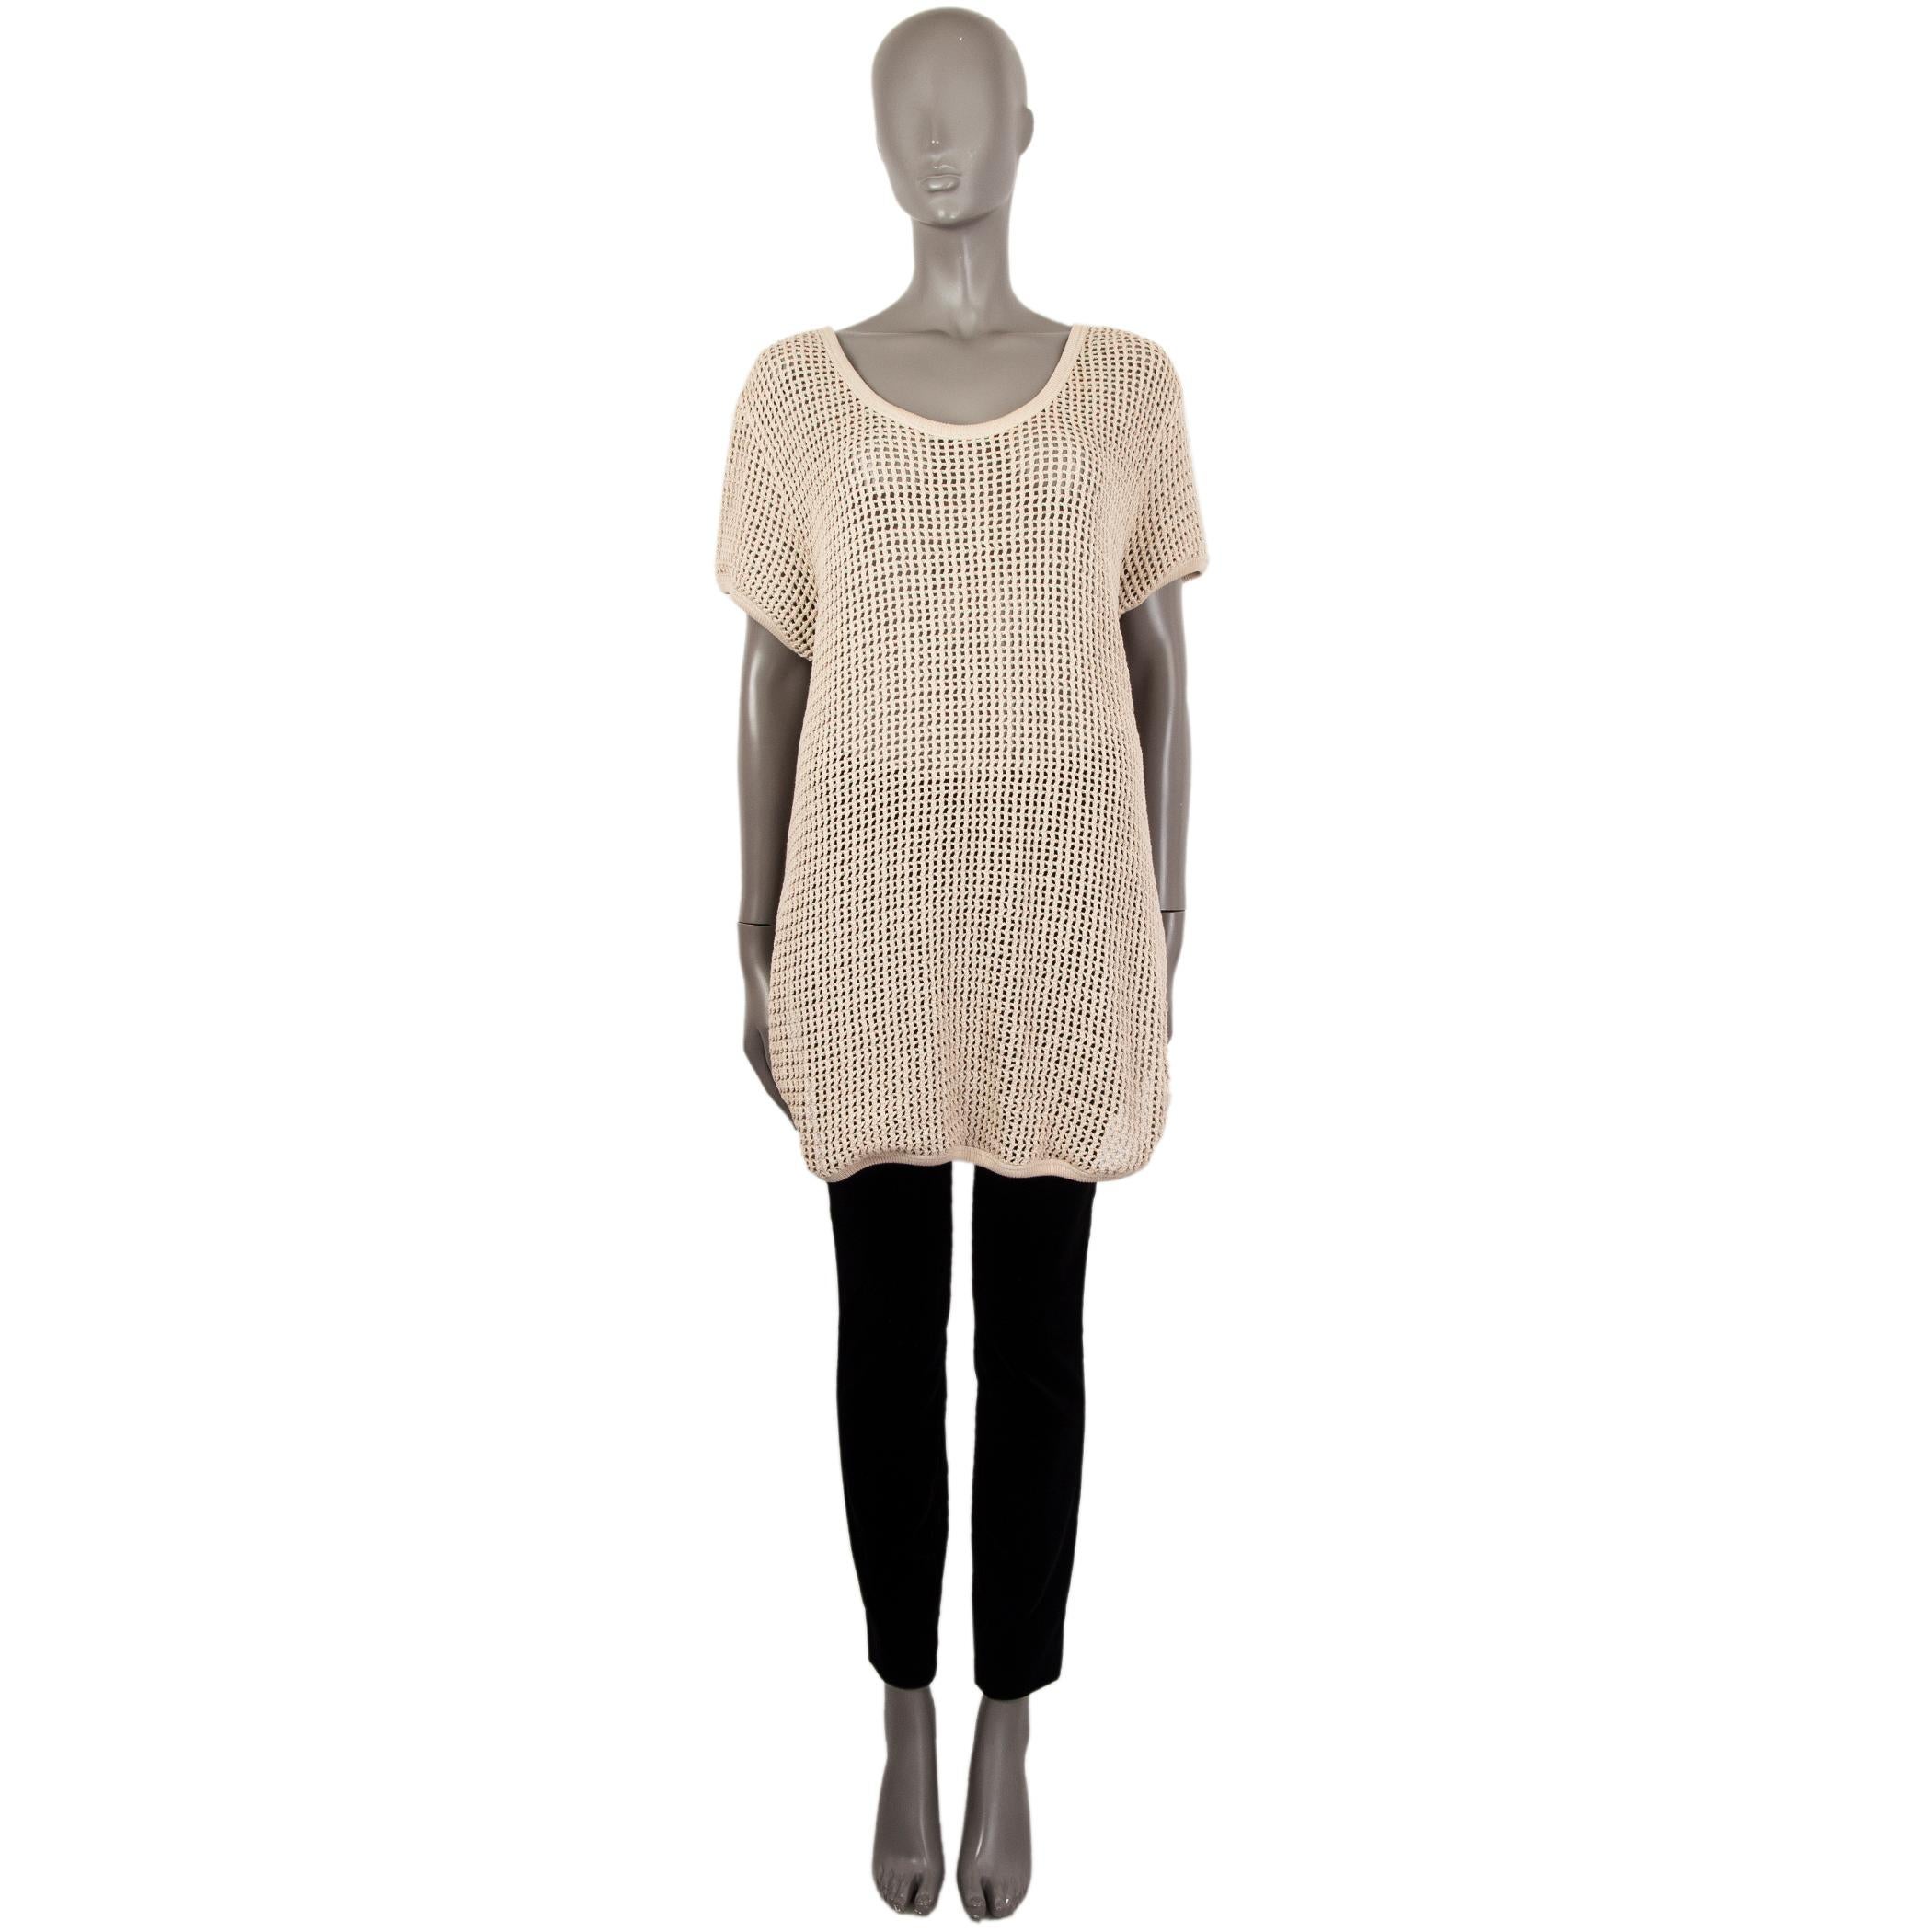 100% authentic Stella McCartney crochet long sweater in beige cotton (100%) with a scoop back, short sleeves and slits on the sides. Closes with two buttons and matching bar. Unlined. Has been worn and is in excellent condition.

Measurements
Tag